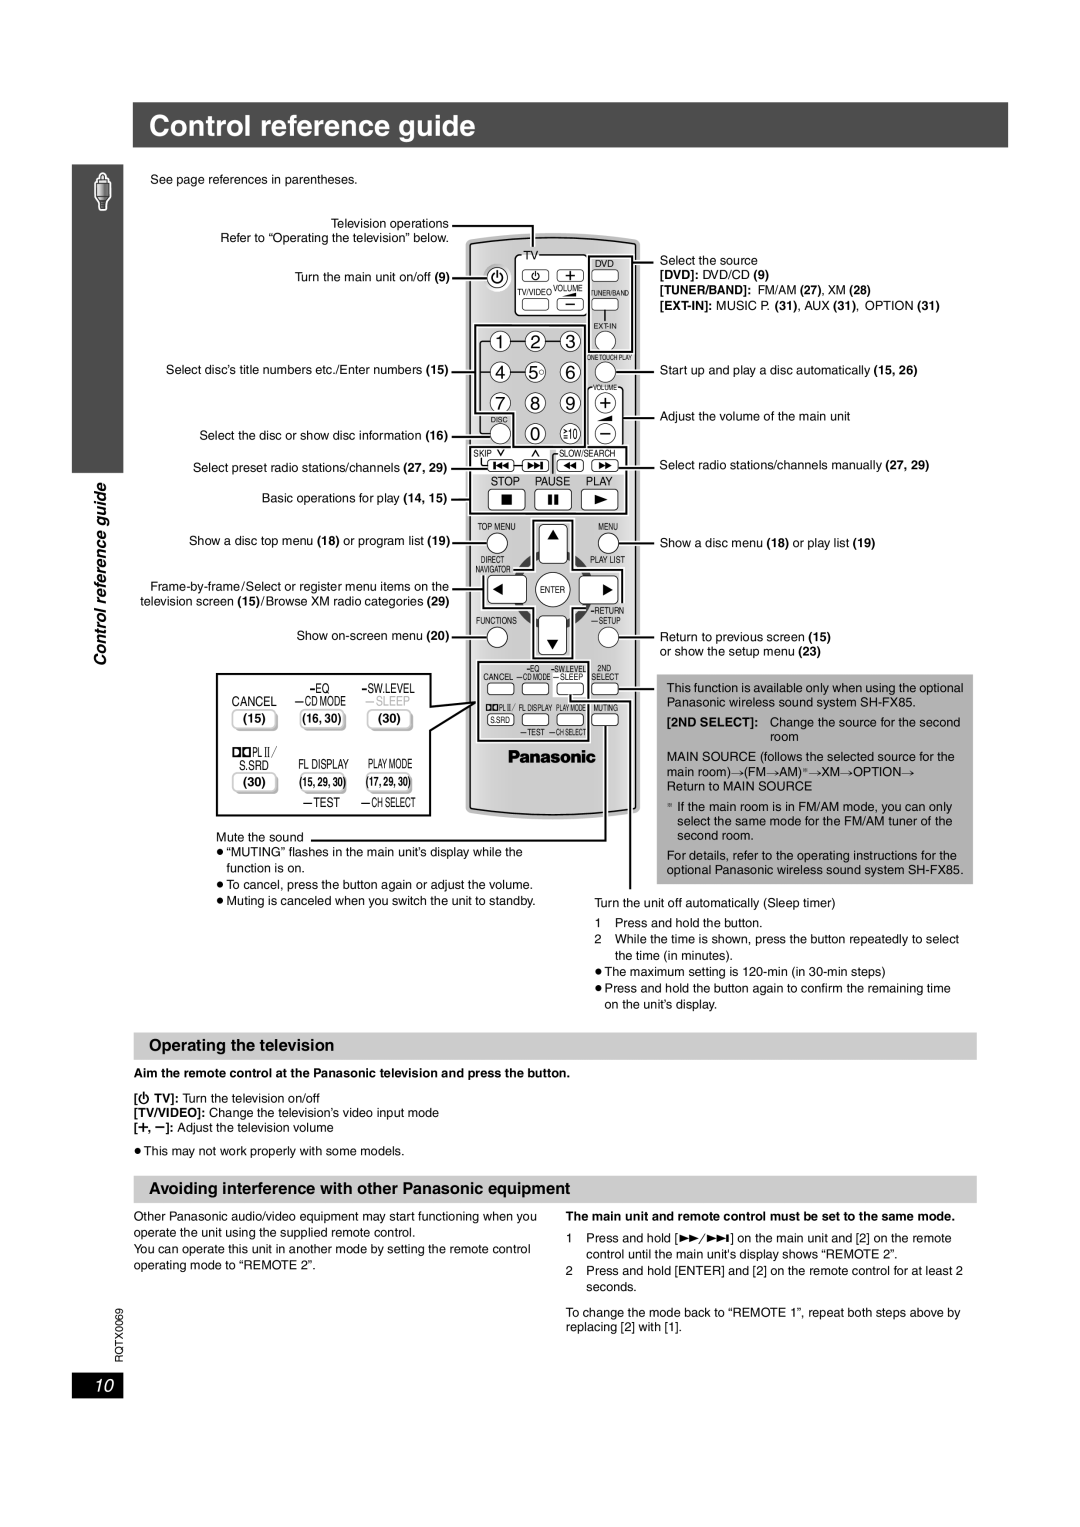 Panasonic SC-PT650 Control reference guide, Operating the television, Cancel, Sleep, Play Mode, S.Srd, Test 